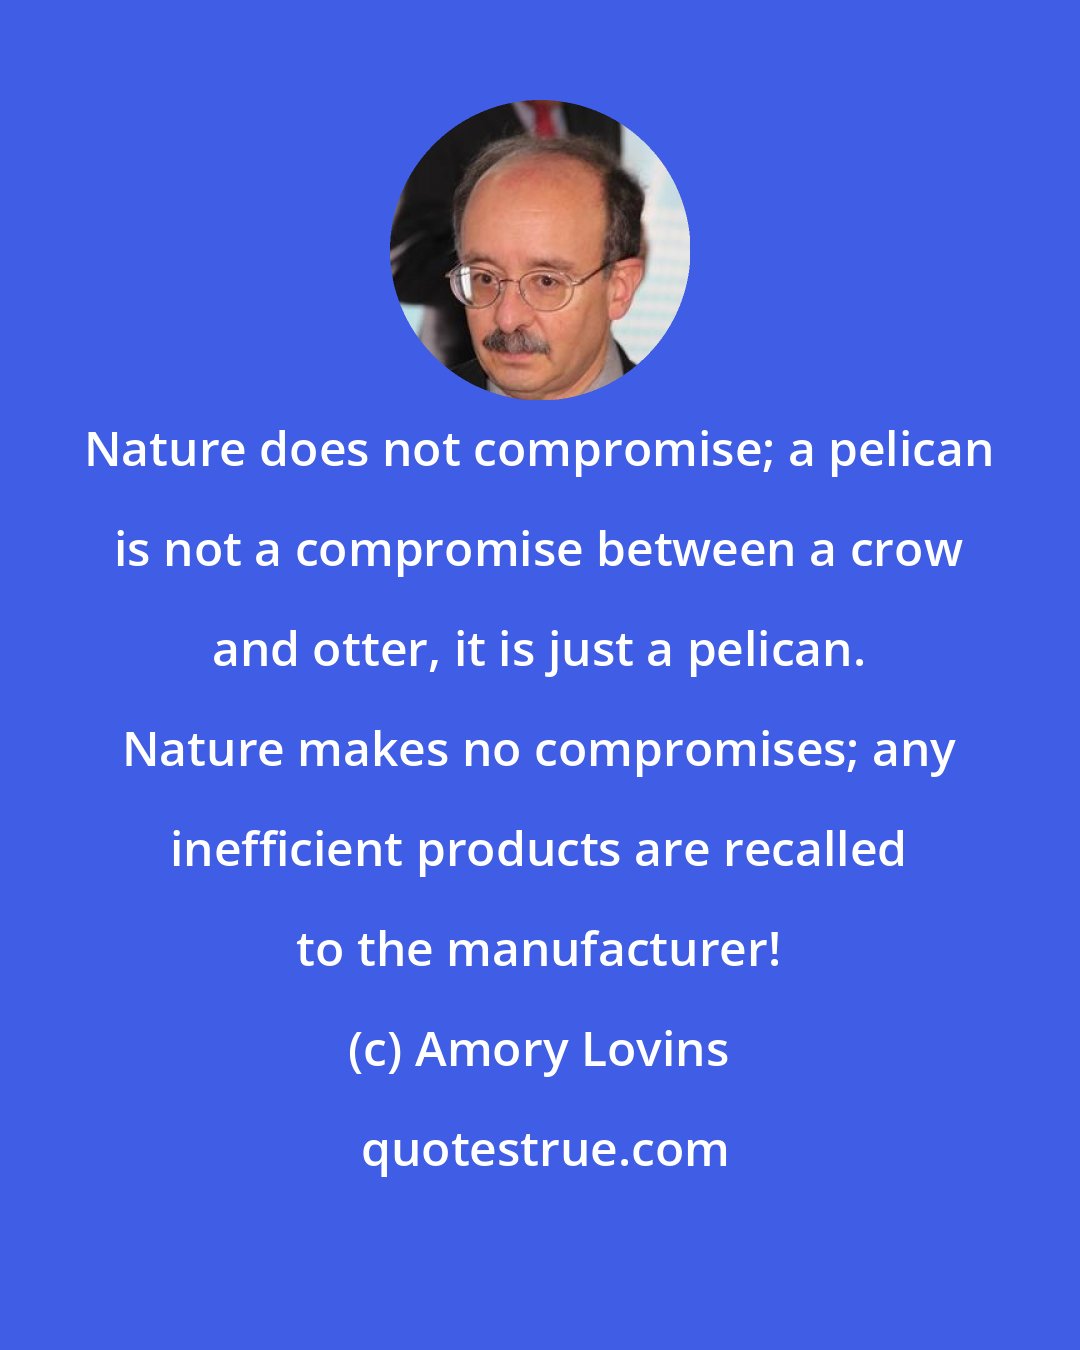 Amory Lovins: Nature does not compromise; a pelican is not a compromise between a crow and otter, it is just a pelican. Nature makes no compromises; any inefficient products are recalled to the manufacturer!